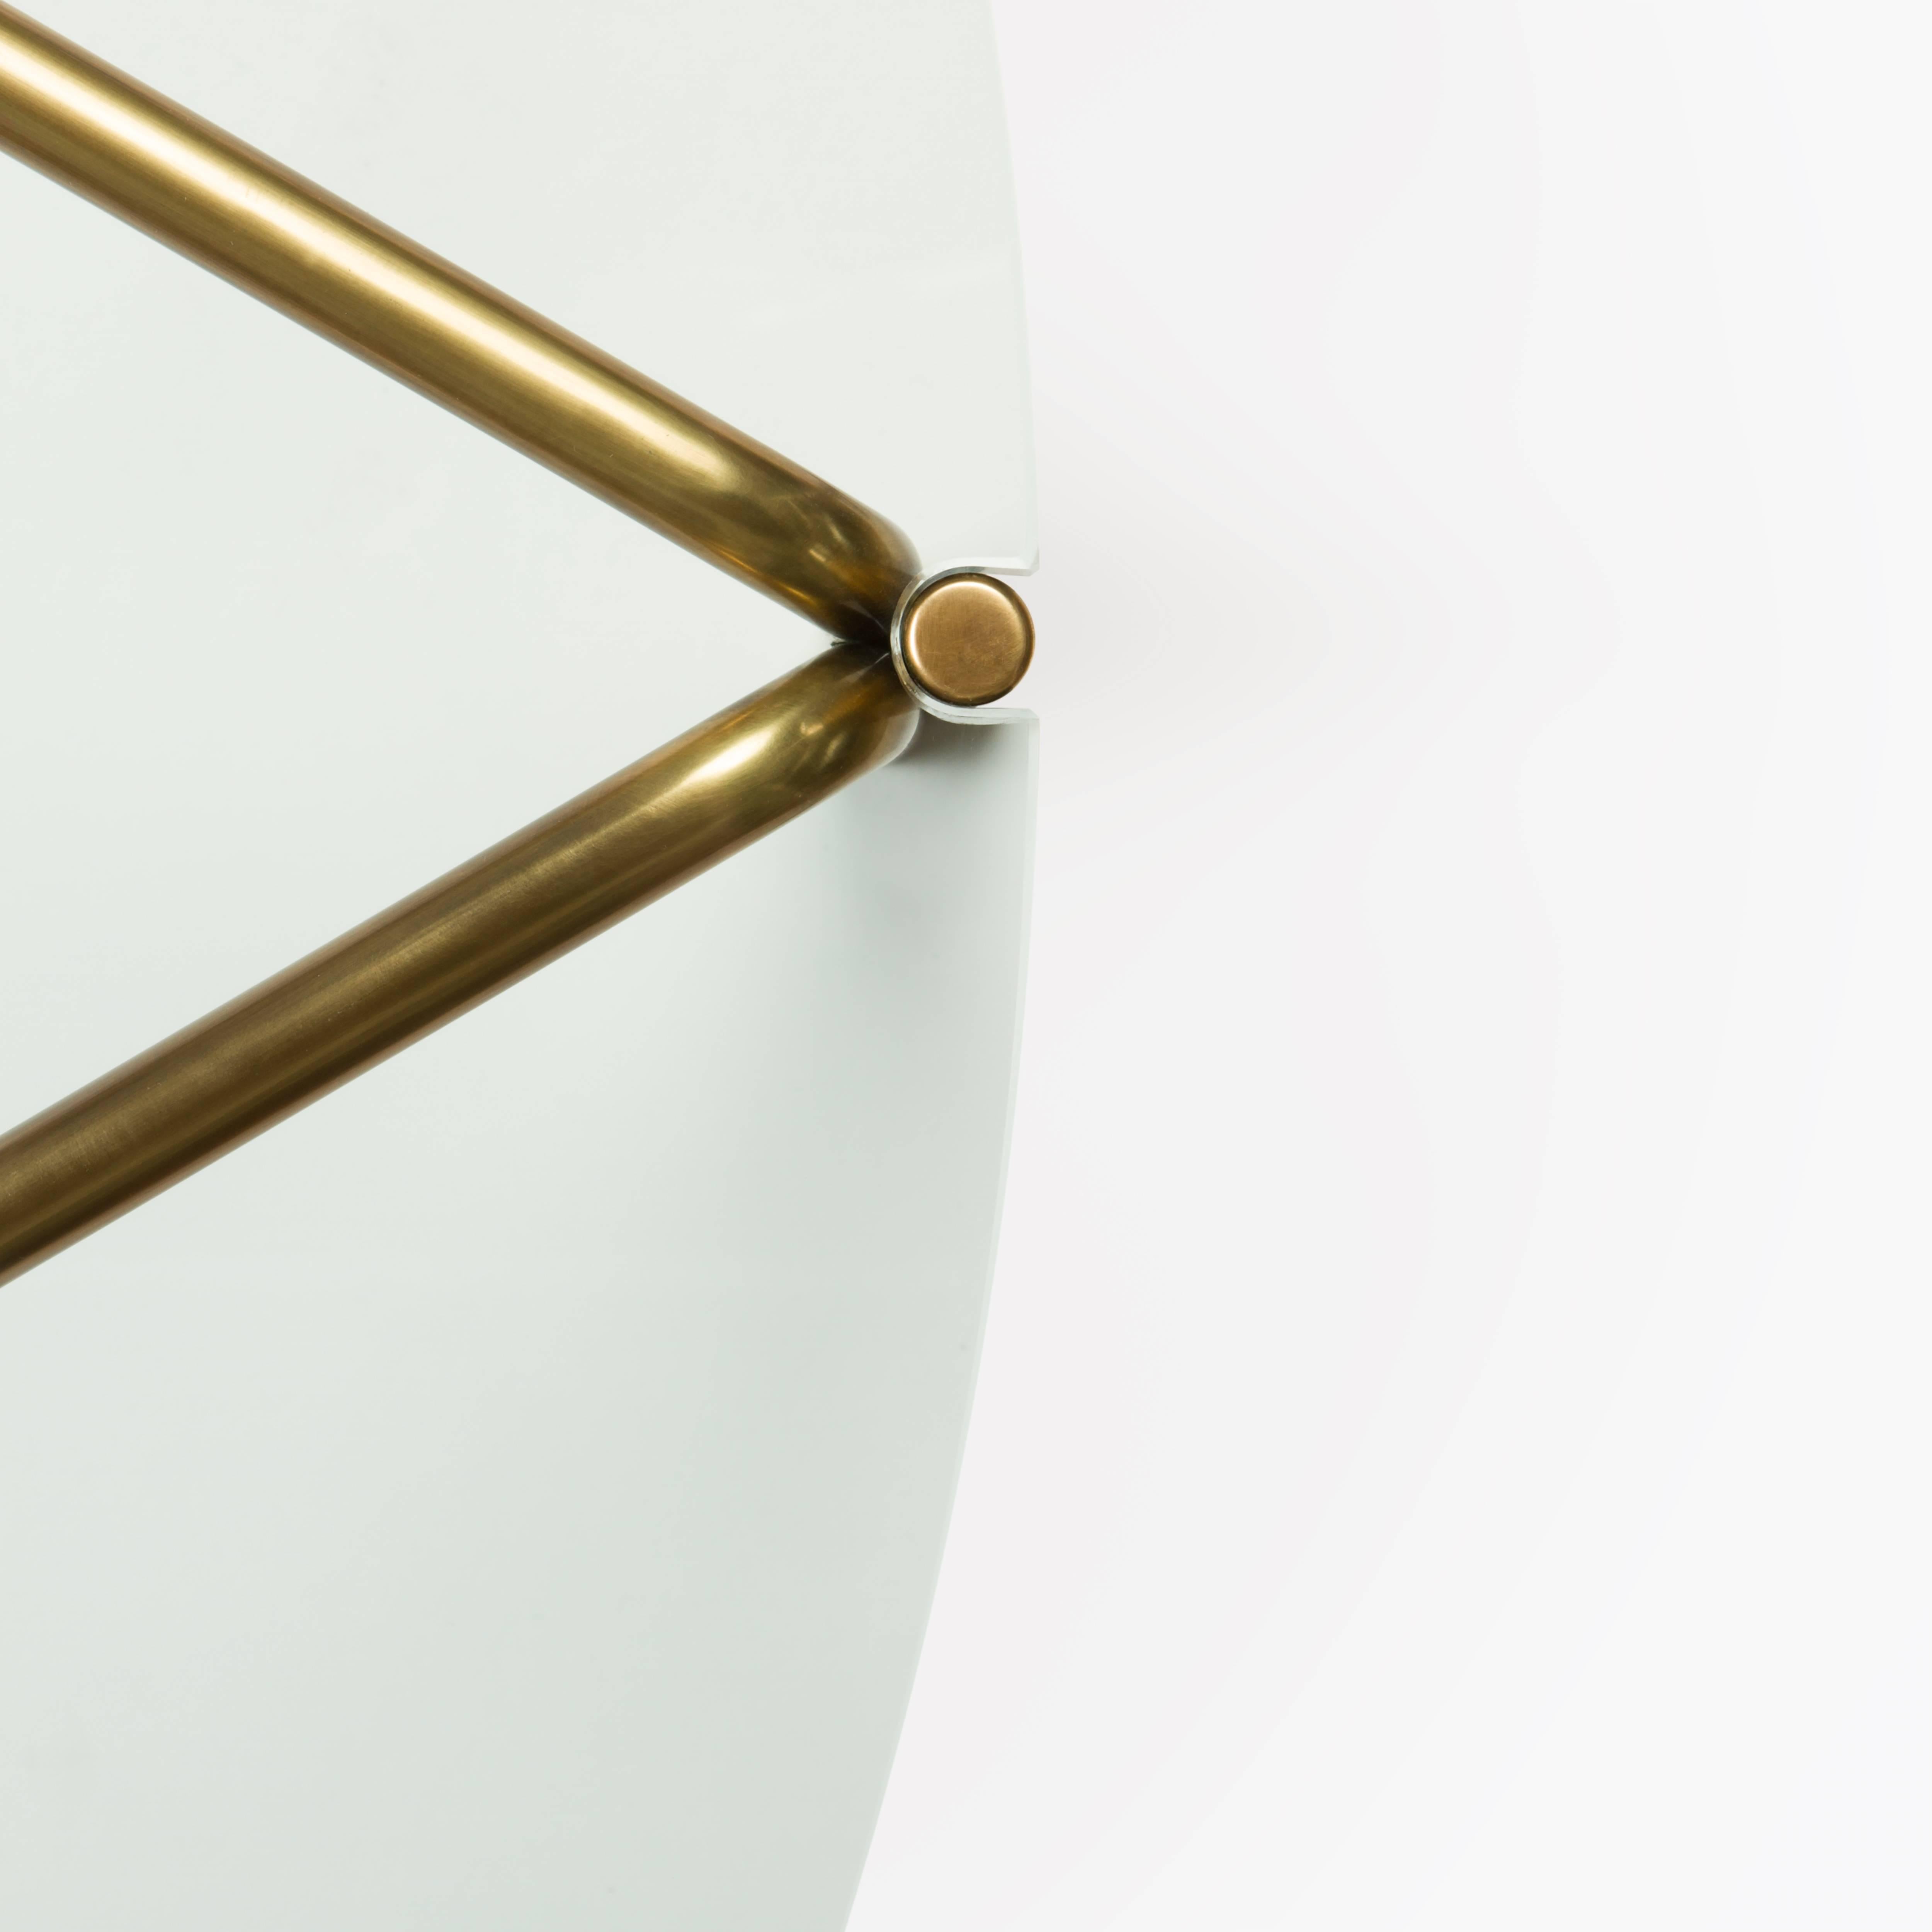 The CA4G series of tables is intended to be understood geometrically, as the round tops circumscribe triangulated frames below. 

Available in several custom material and finish options, tempered glass top / polished, unlacquered brass frame and